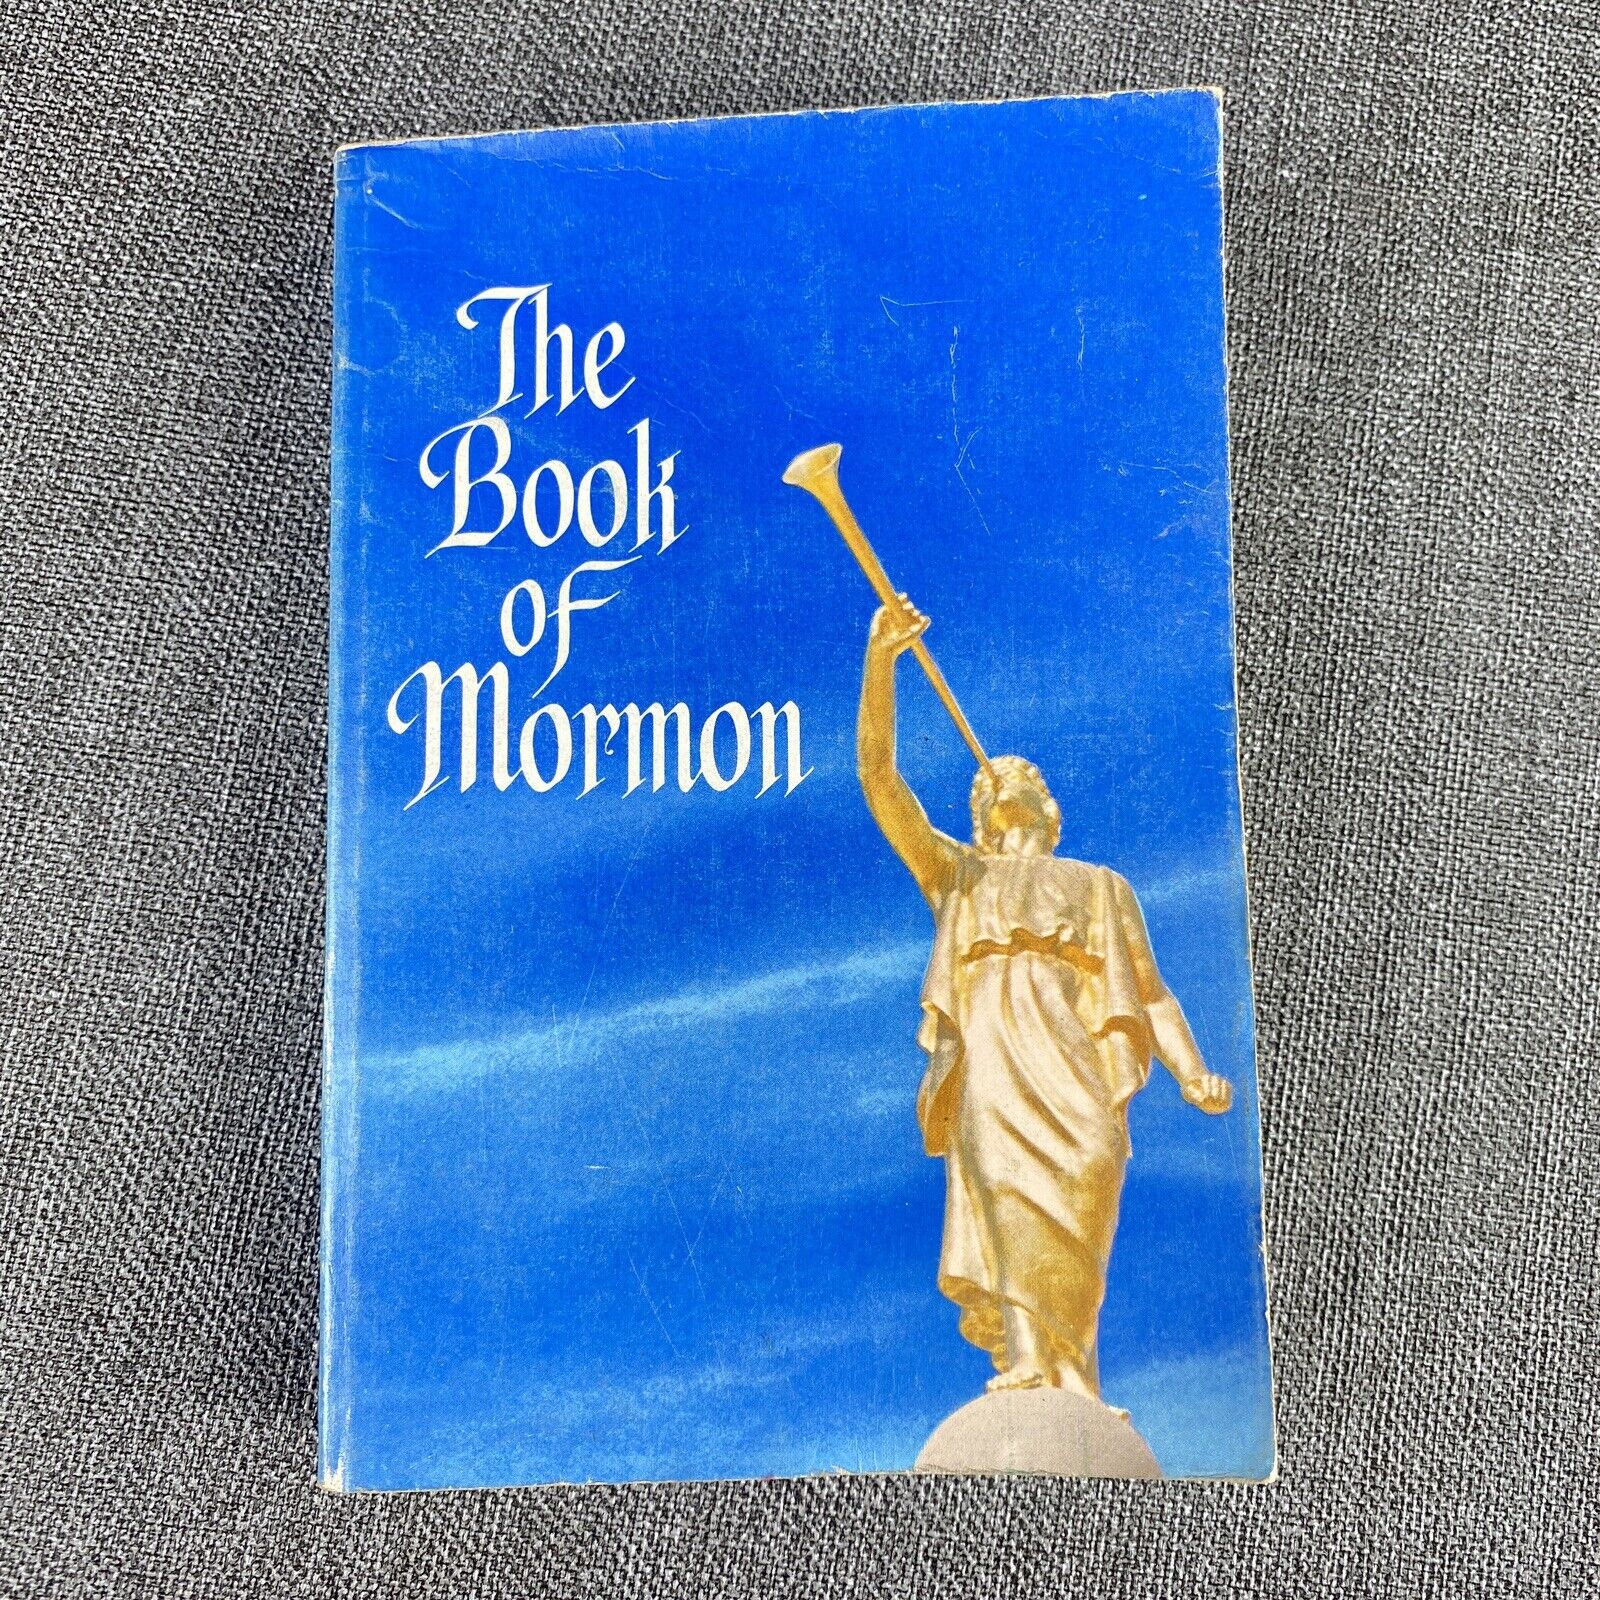 The Book of Mormon An Account Written by the Hand of Mormon (Paperback, 1977)